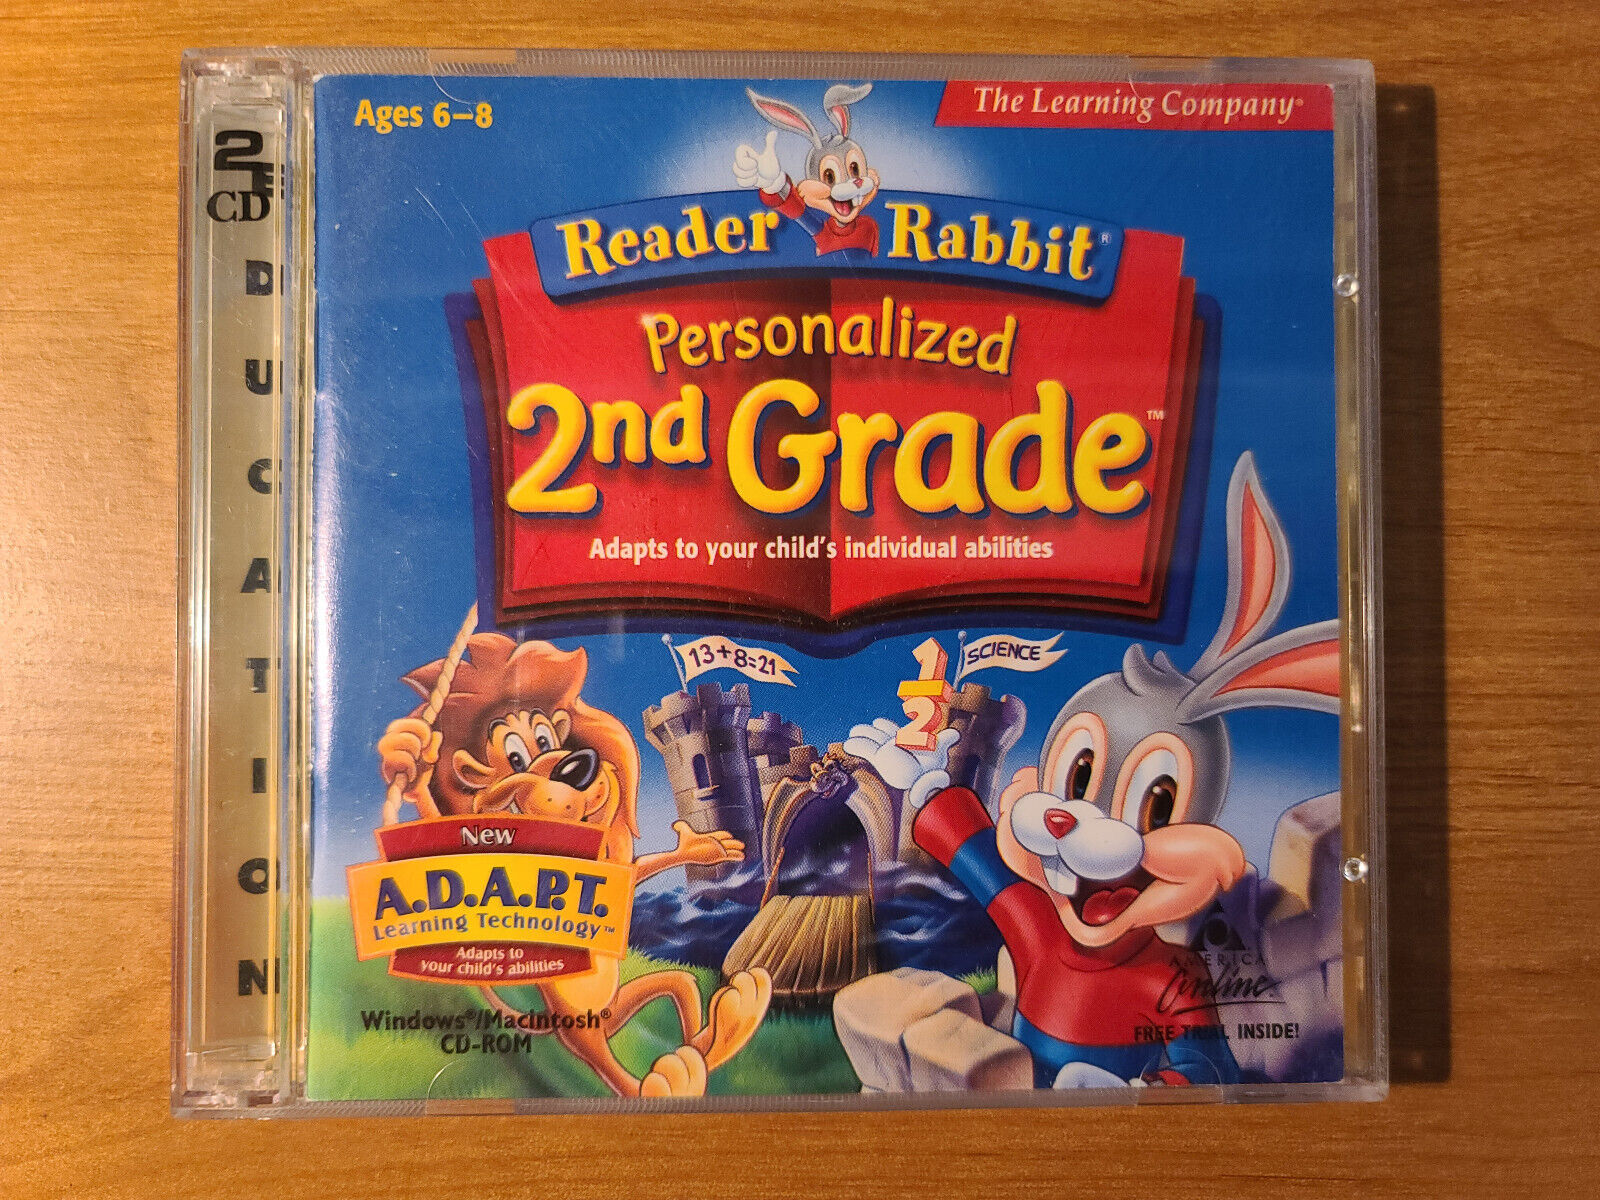 Reader Rabbit Personalized 2nd Grade Ages 6-8 1999 v2.0 Windows/Mac